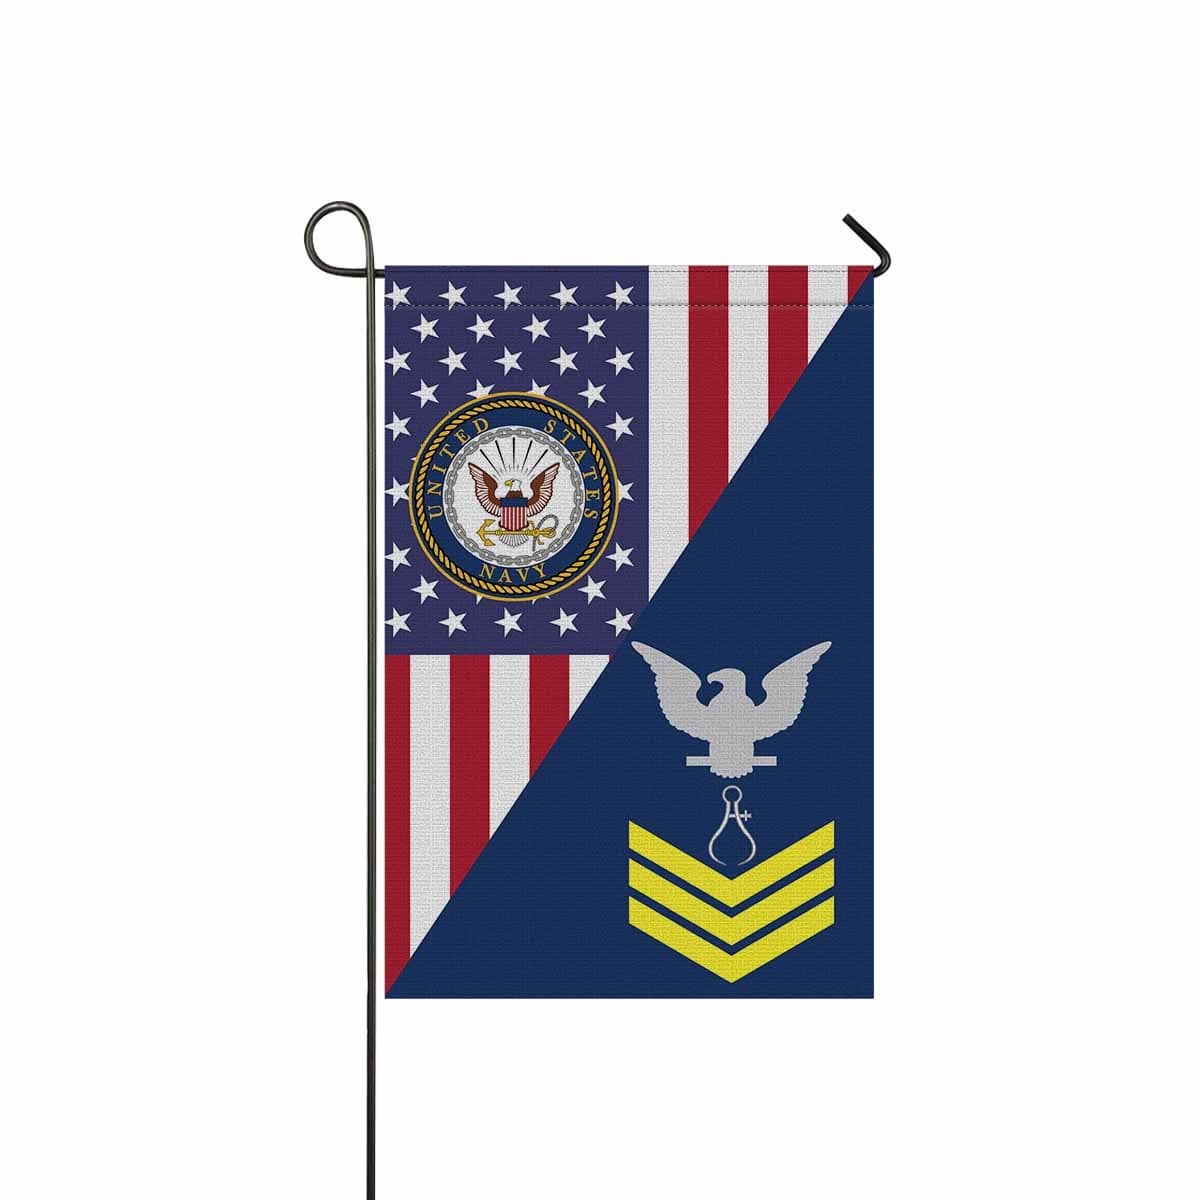 Navy Instrumentman Navy IM E-6 Gold Stripe Garden Flag/Yard Flag 12 inches x 18 inches Twin-Side Printing-GDFlag-Navy-Rating-Veterans Nation